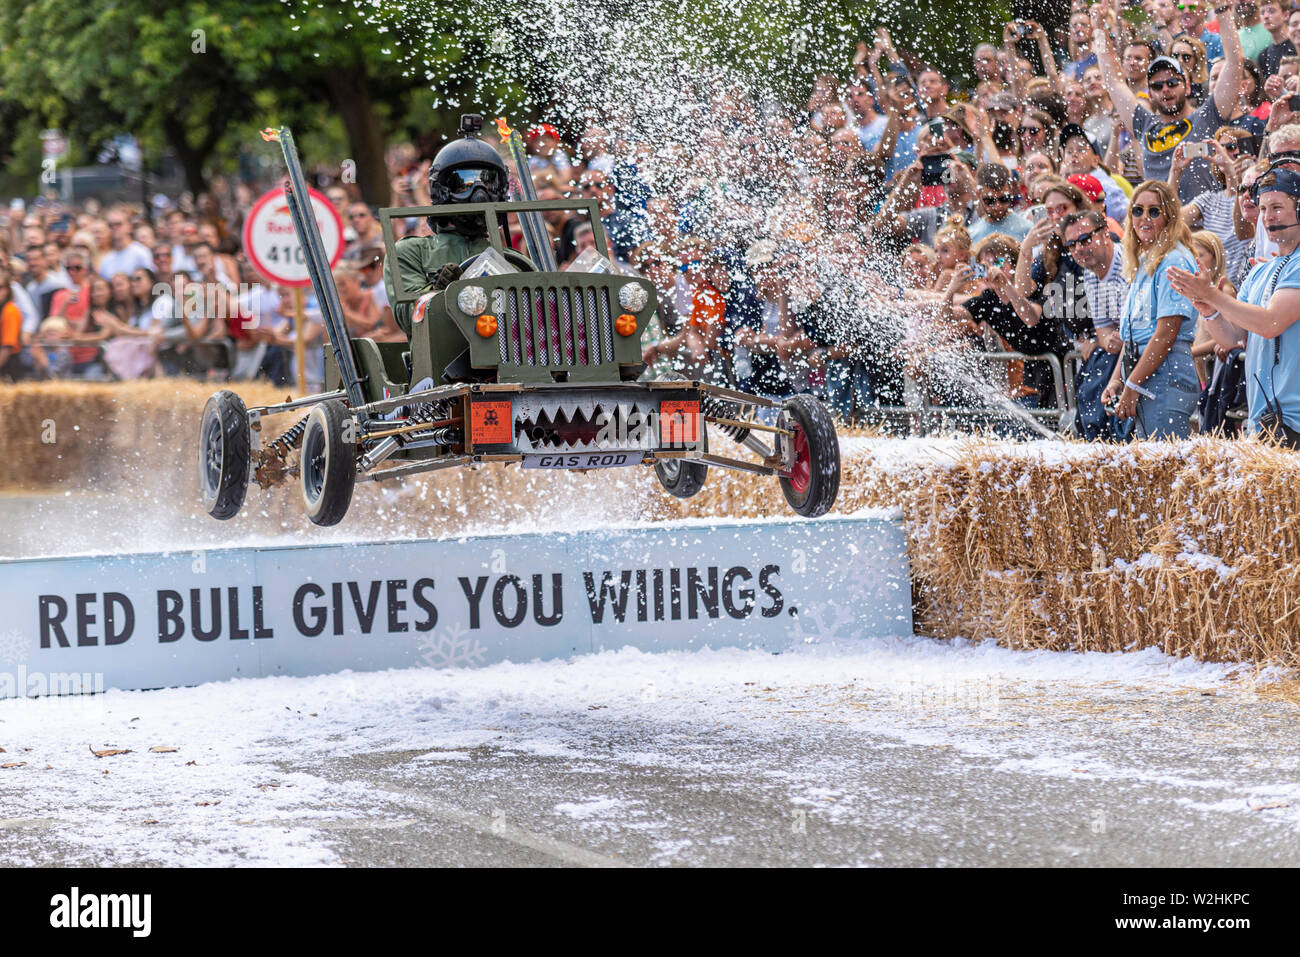 Team Gas Gas Gas Willys Jeep competing in the Red Bull Soapbox Race 2019 at Park, London, UK. Jumping over ramp people. winner Stock Photo - Alamy